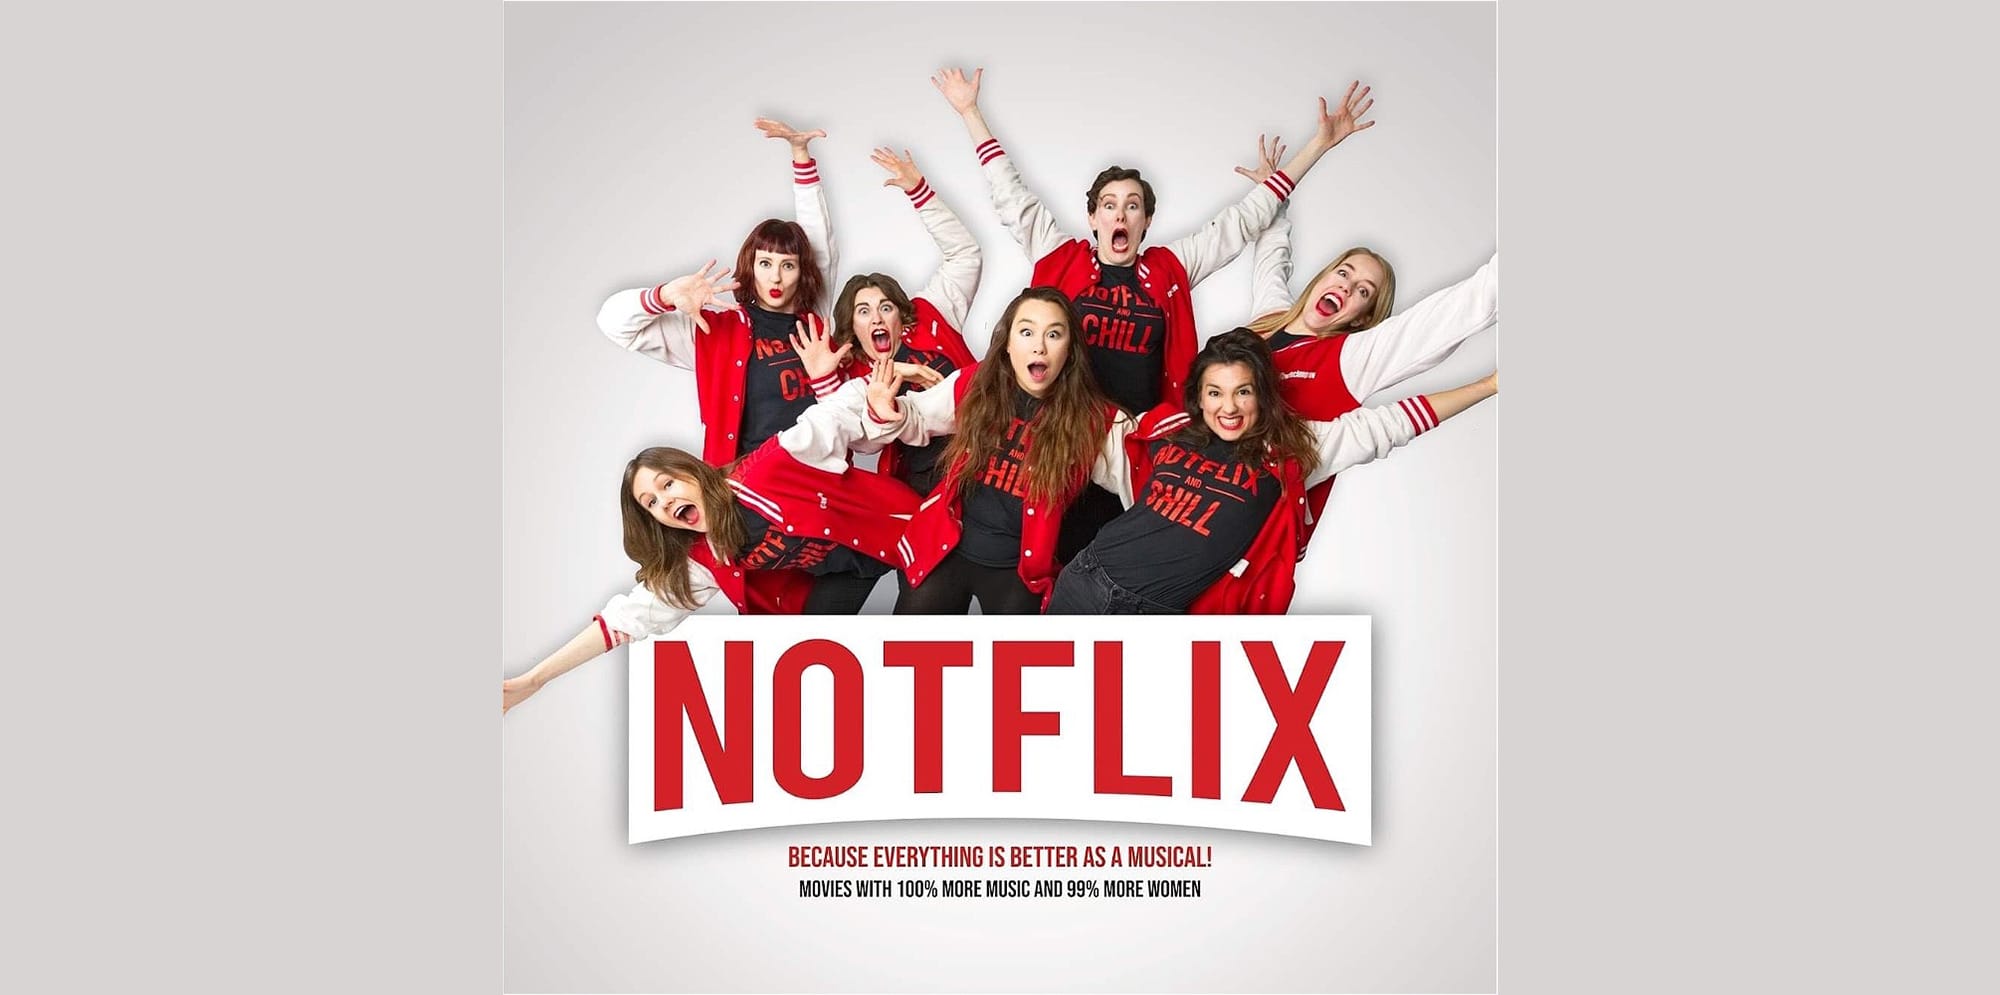 Seven people wearing varsity jackets pose with their hands in the air. text on image reads Notflix